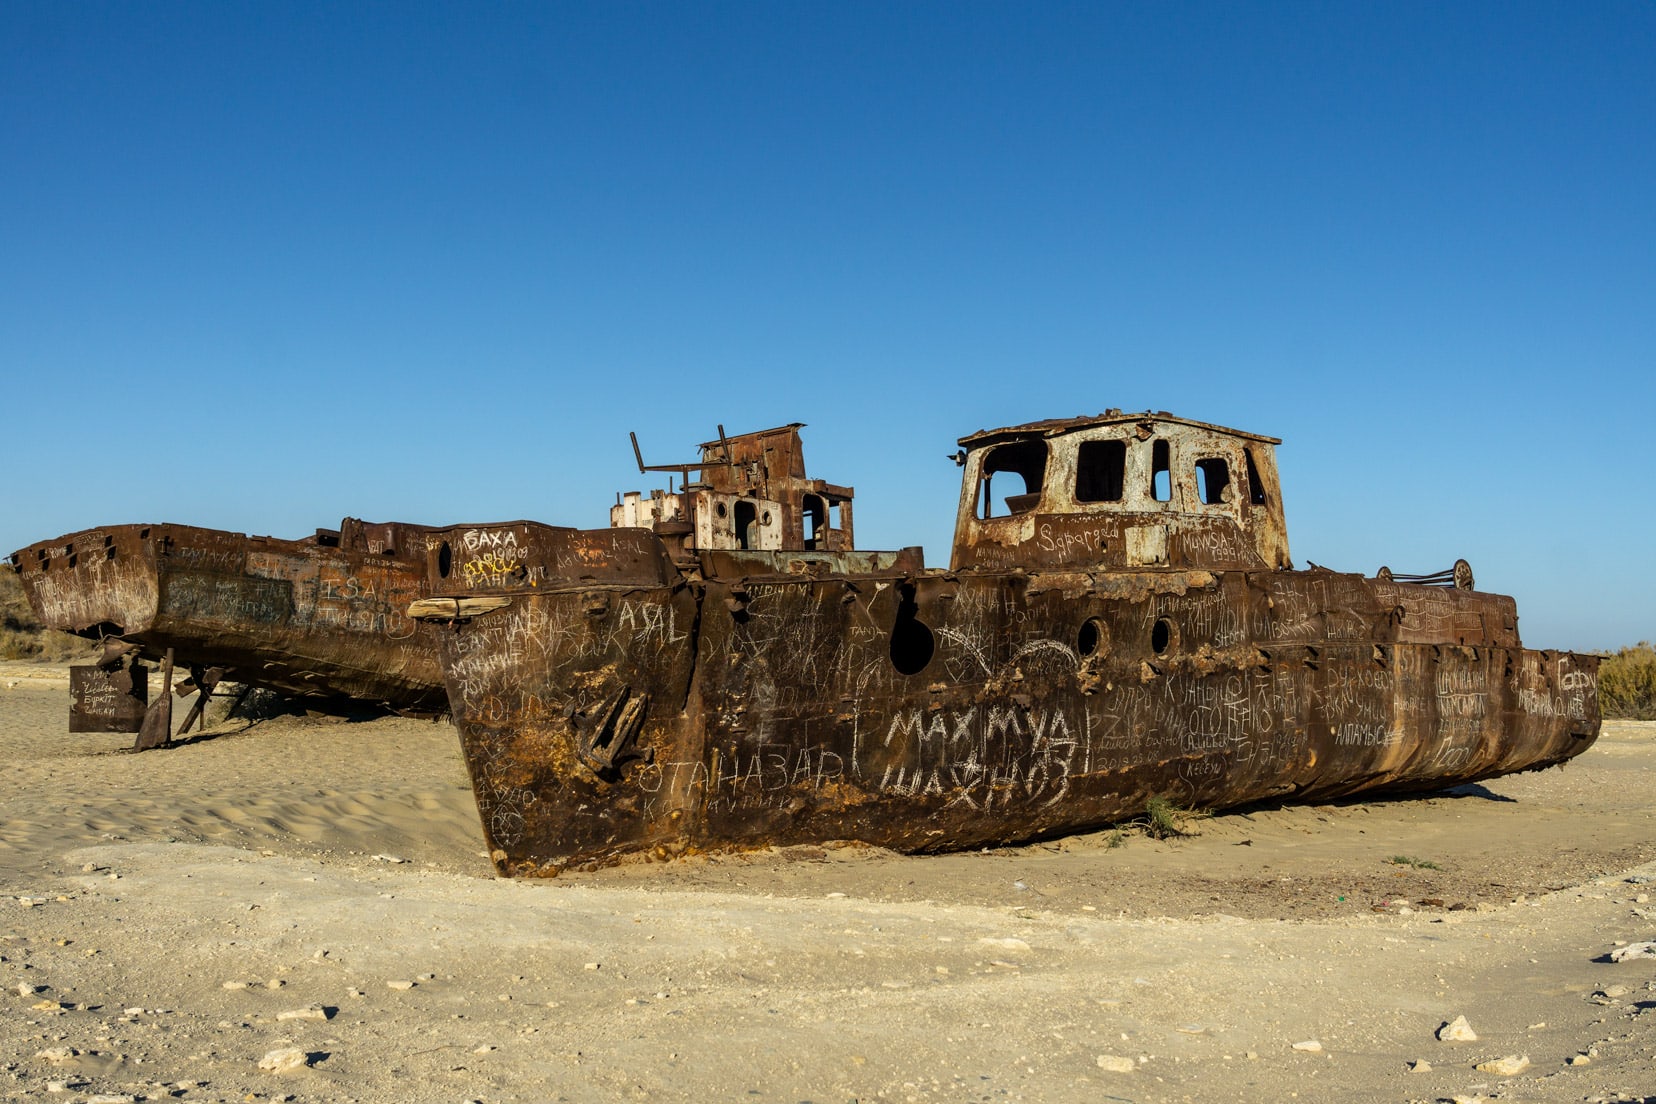 2-rusty-old-ships-on-the-desert-sands